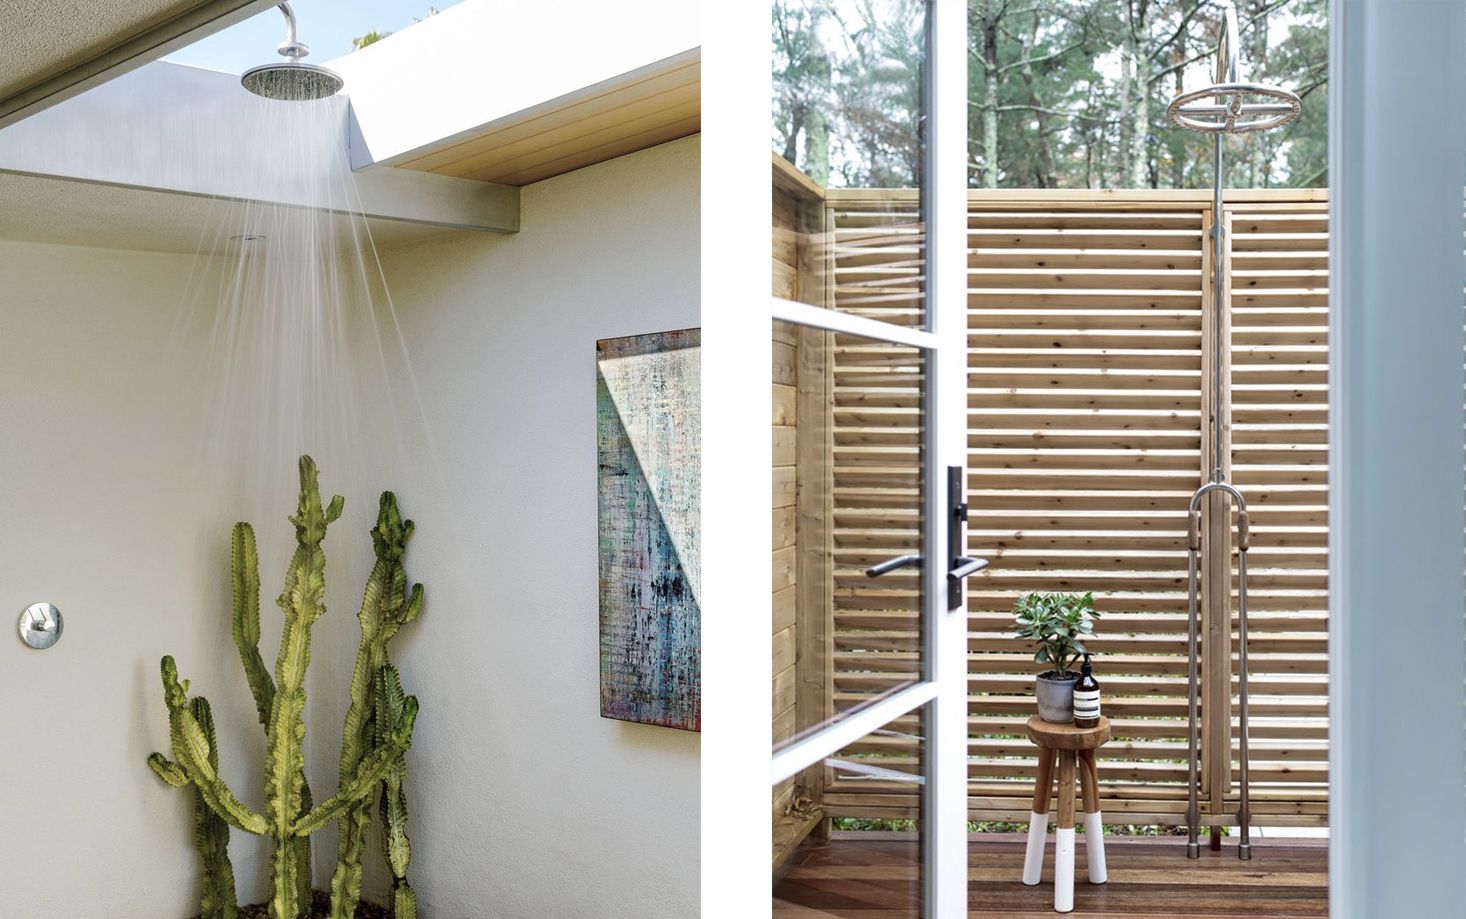 35 Stylish And Refreshing Outdoor Showers - Shelterness